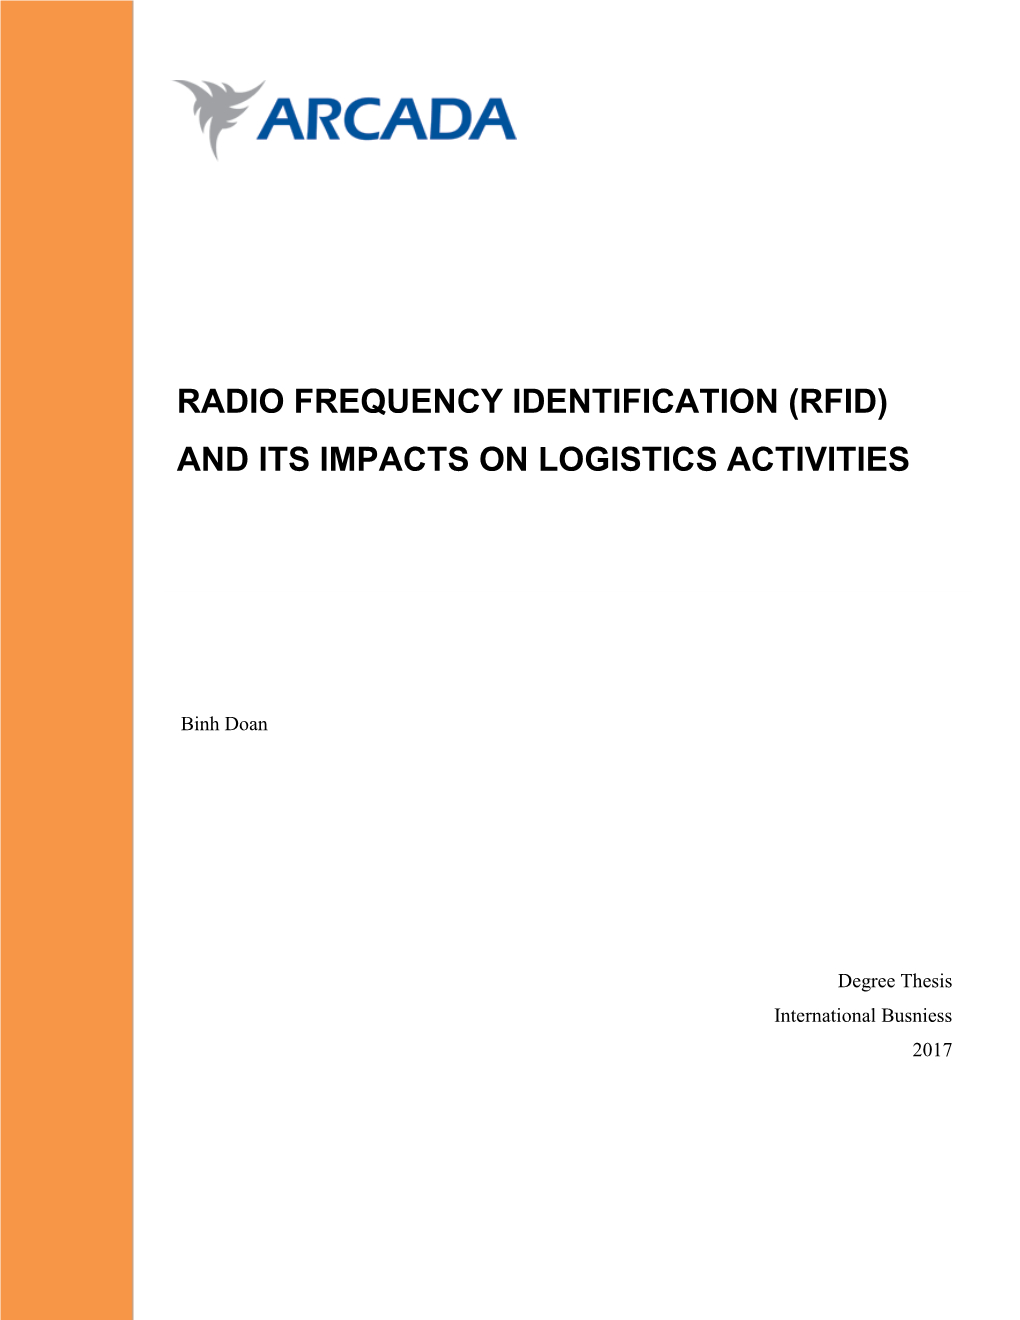 (Rfid) and Its Impacts on Logistics Activities